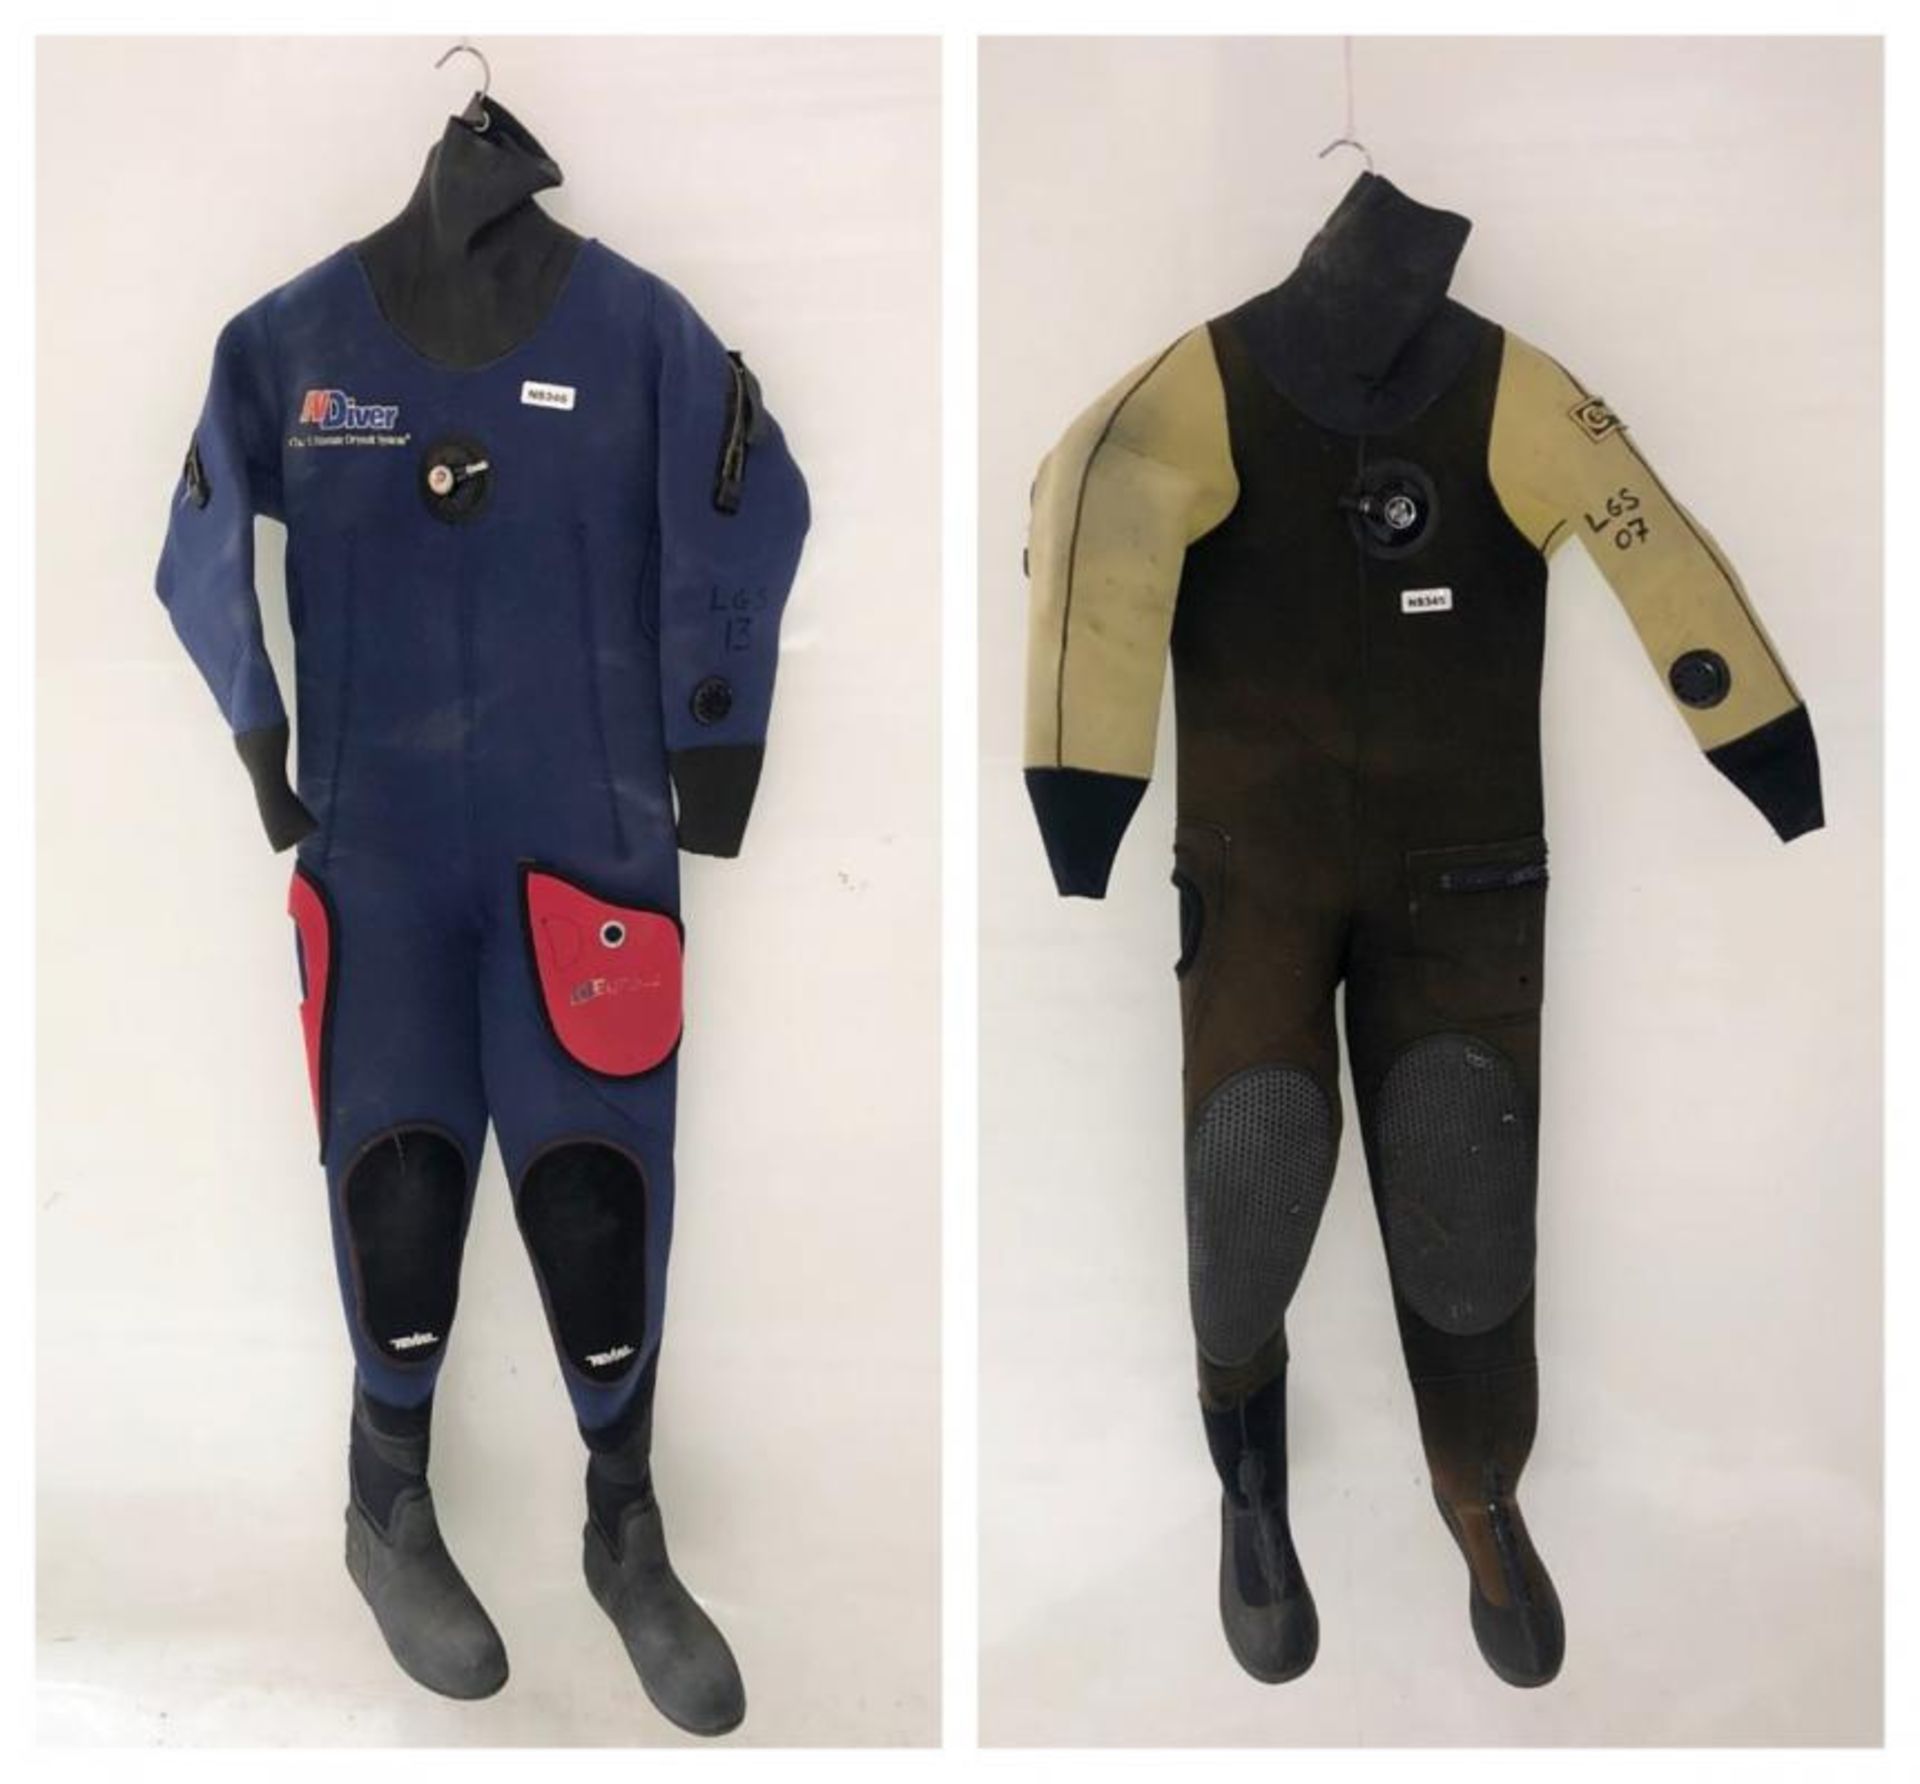 2 x Full Diving Wetsuits - Ref: NS345, NS346 - CL349 - Location: Altrincham WA14 - Used In Good Cond